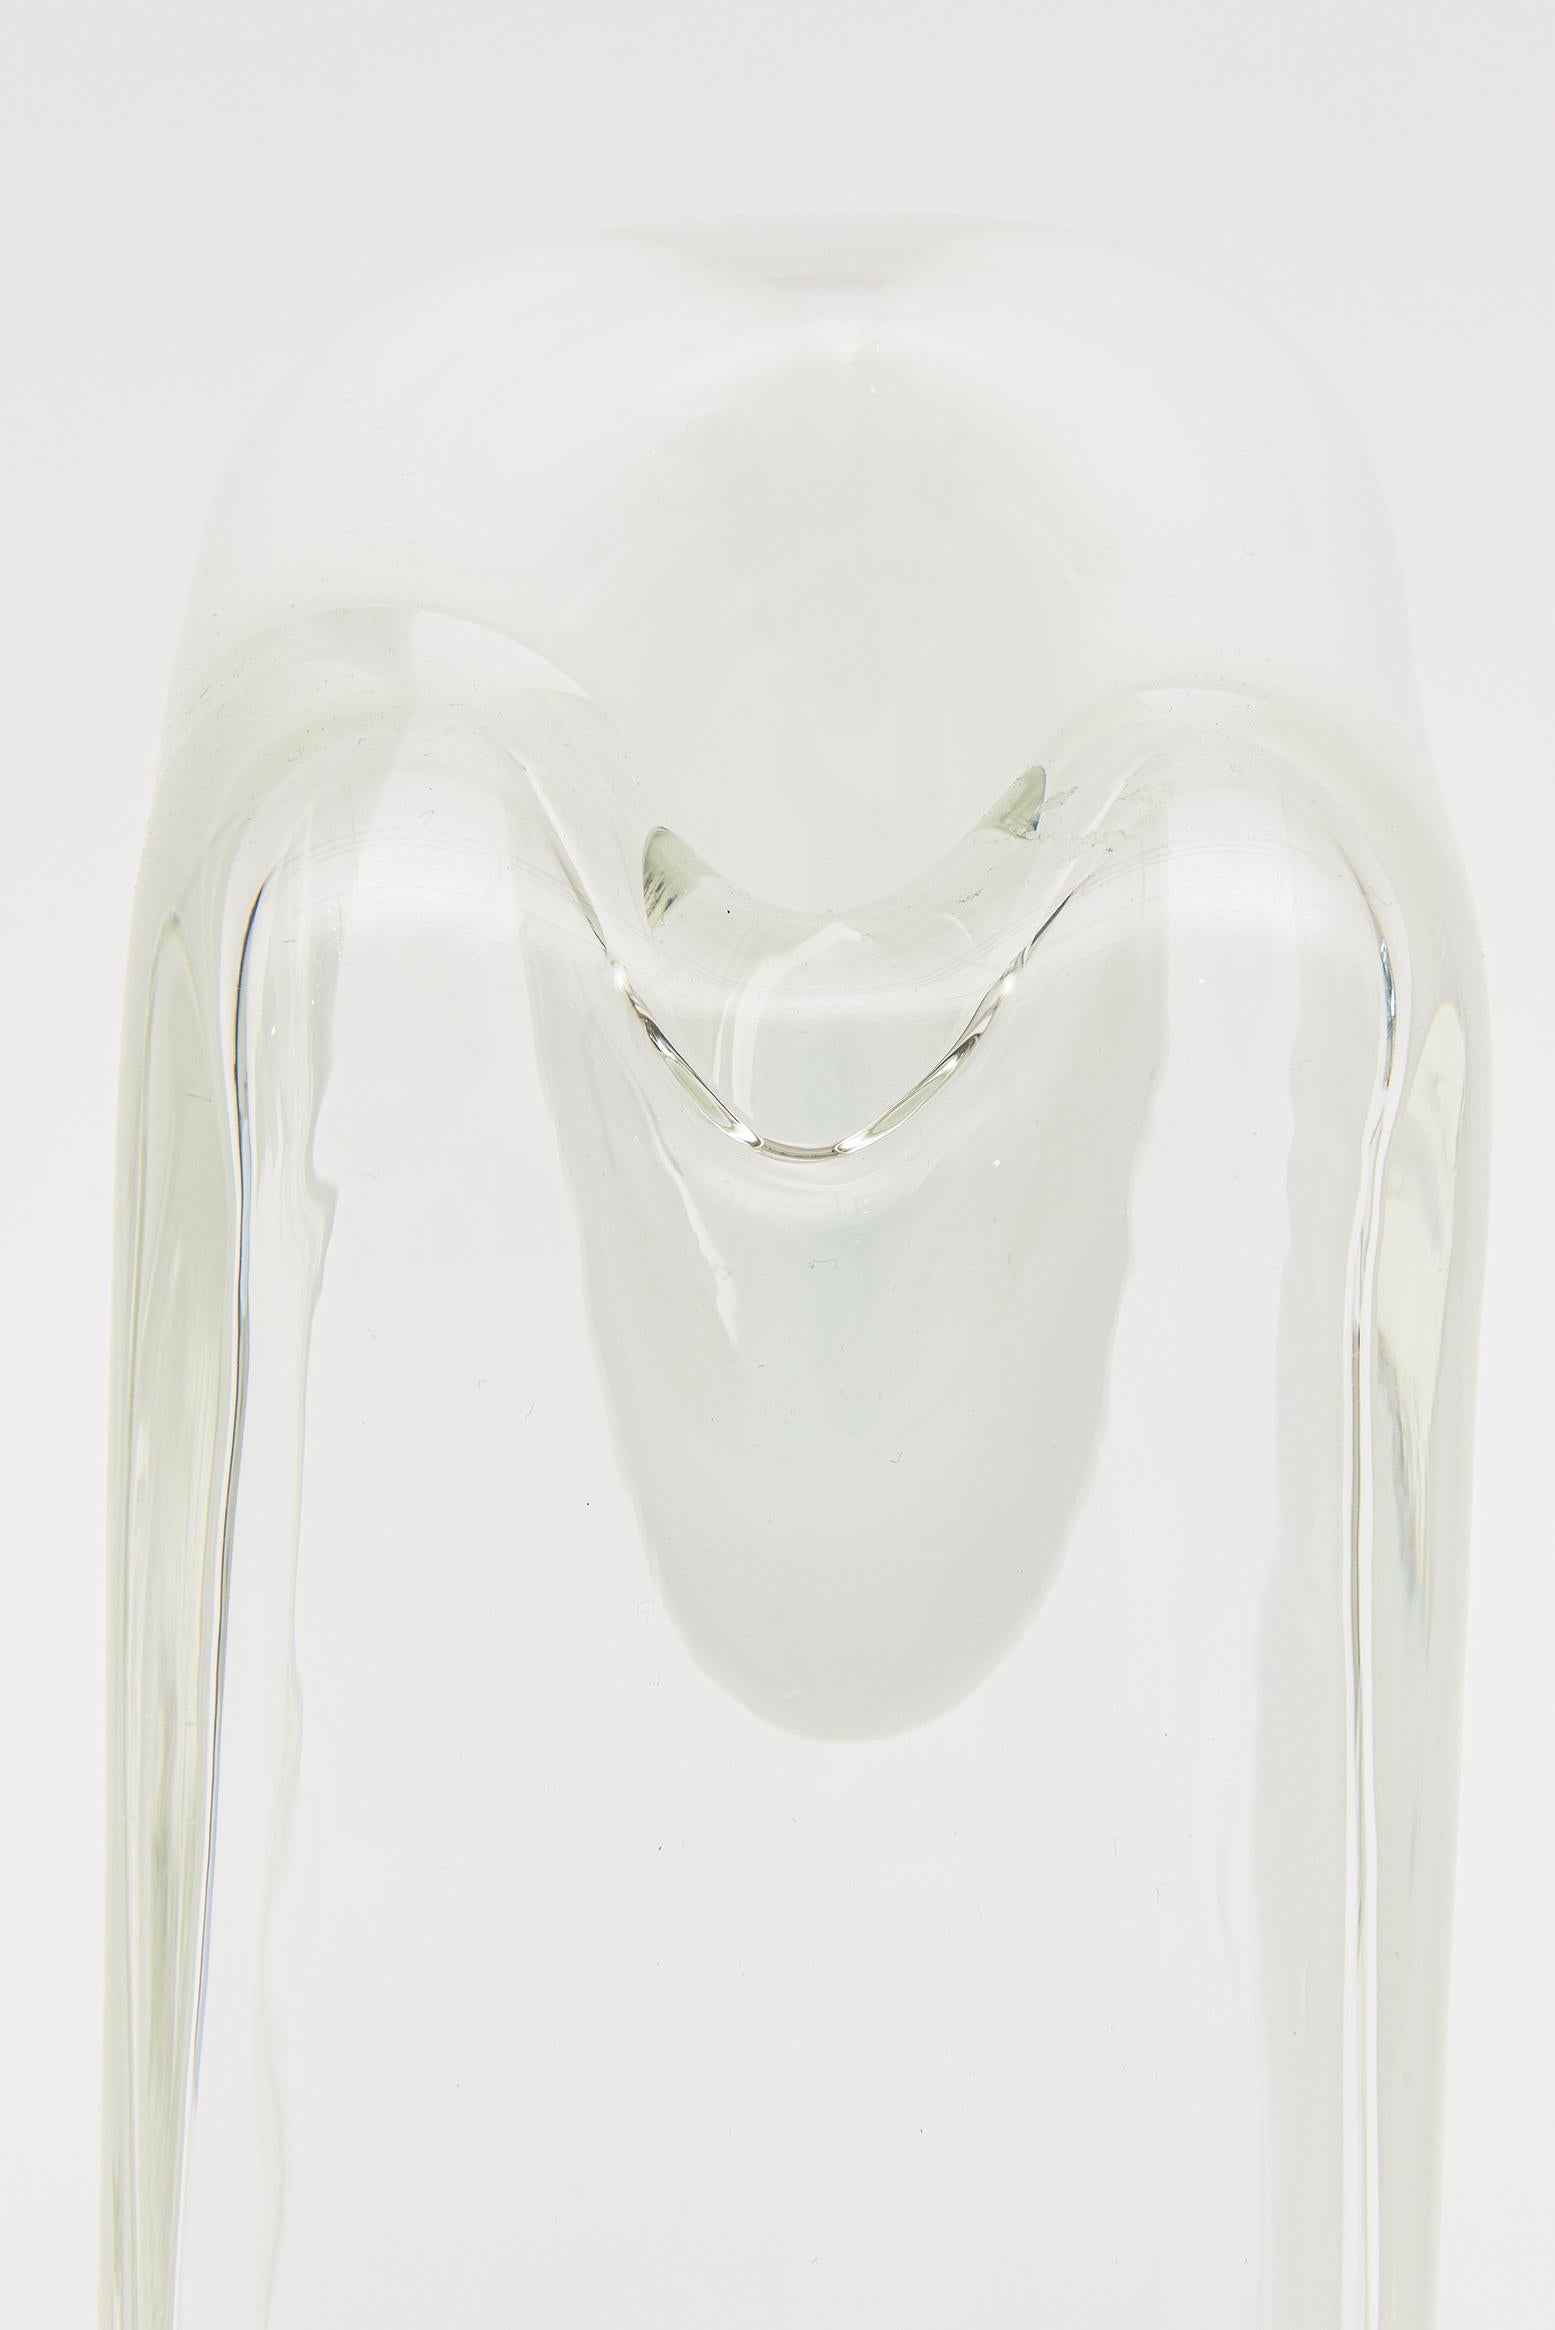 Late 20th Century Vintage Murano Antonio da Ros for Cenedese White, Clear Blob Vases or Vessels  For Sale